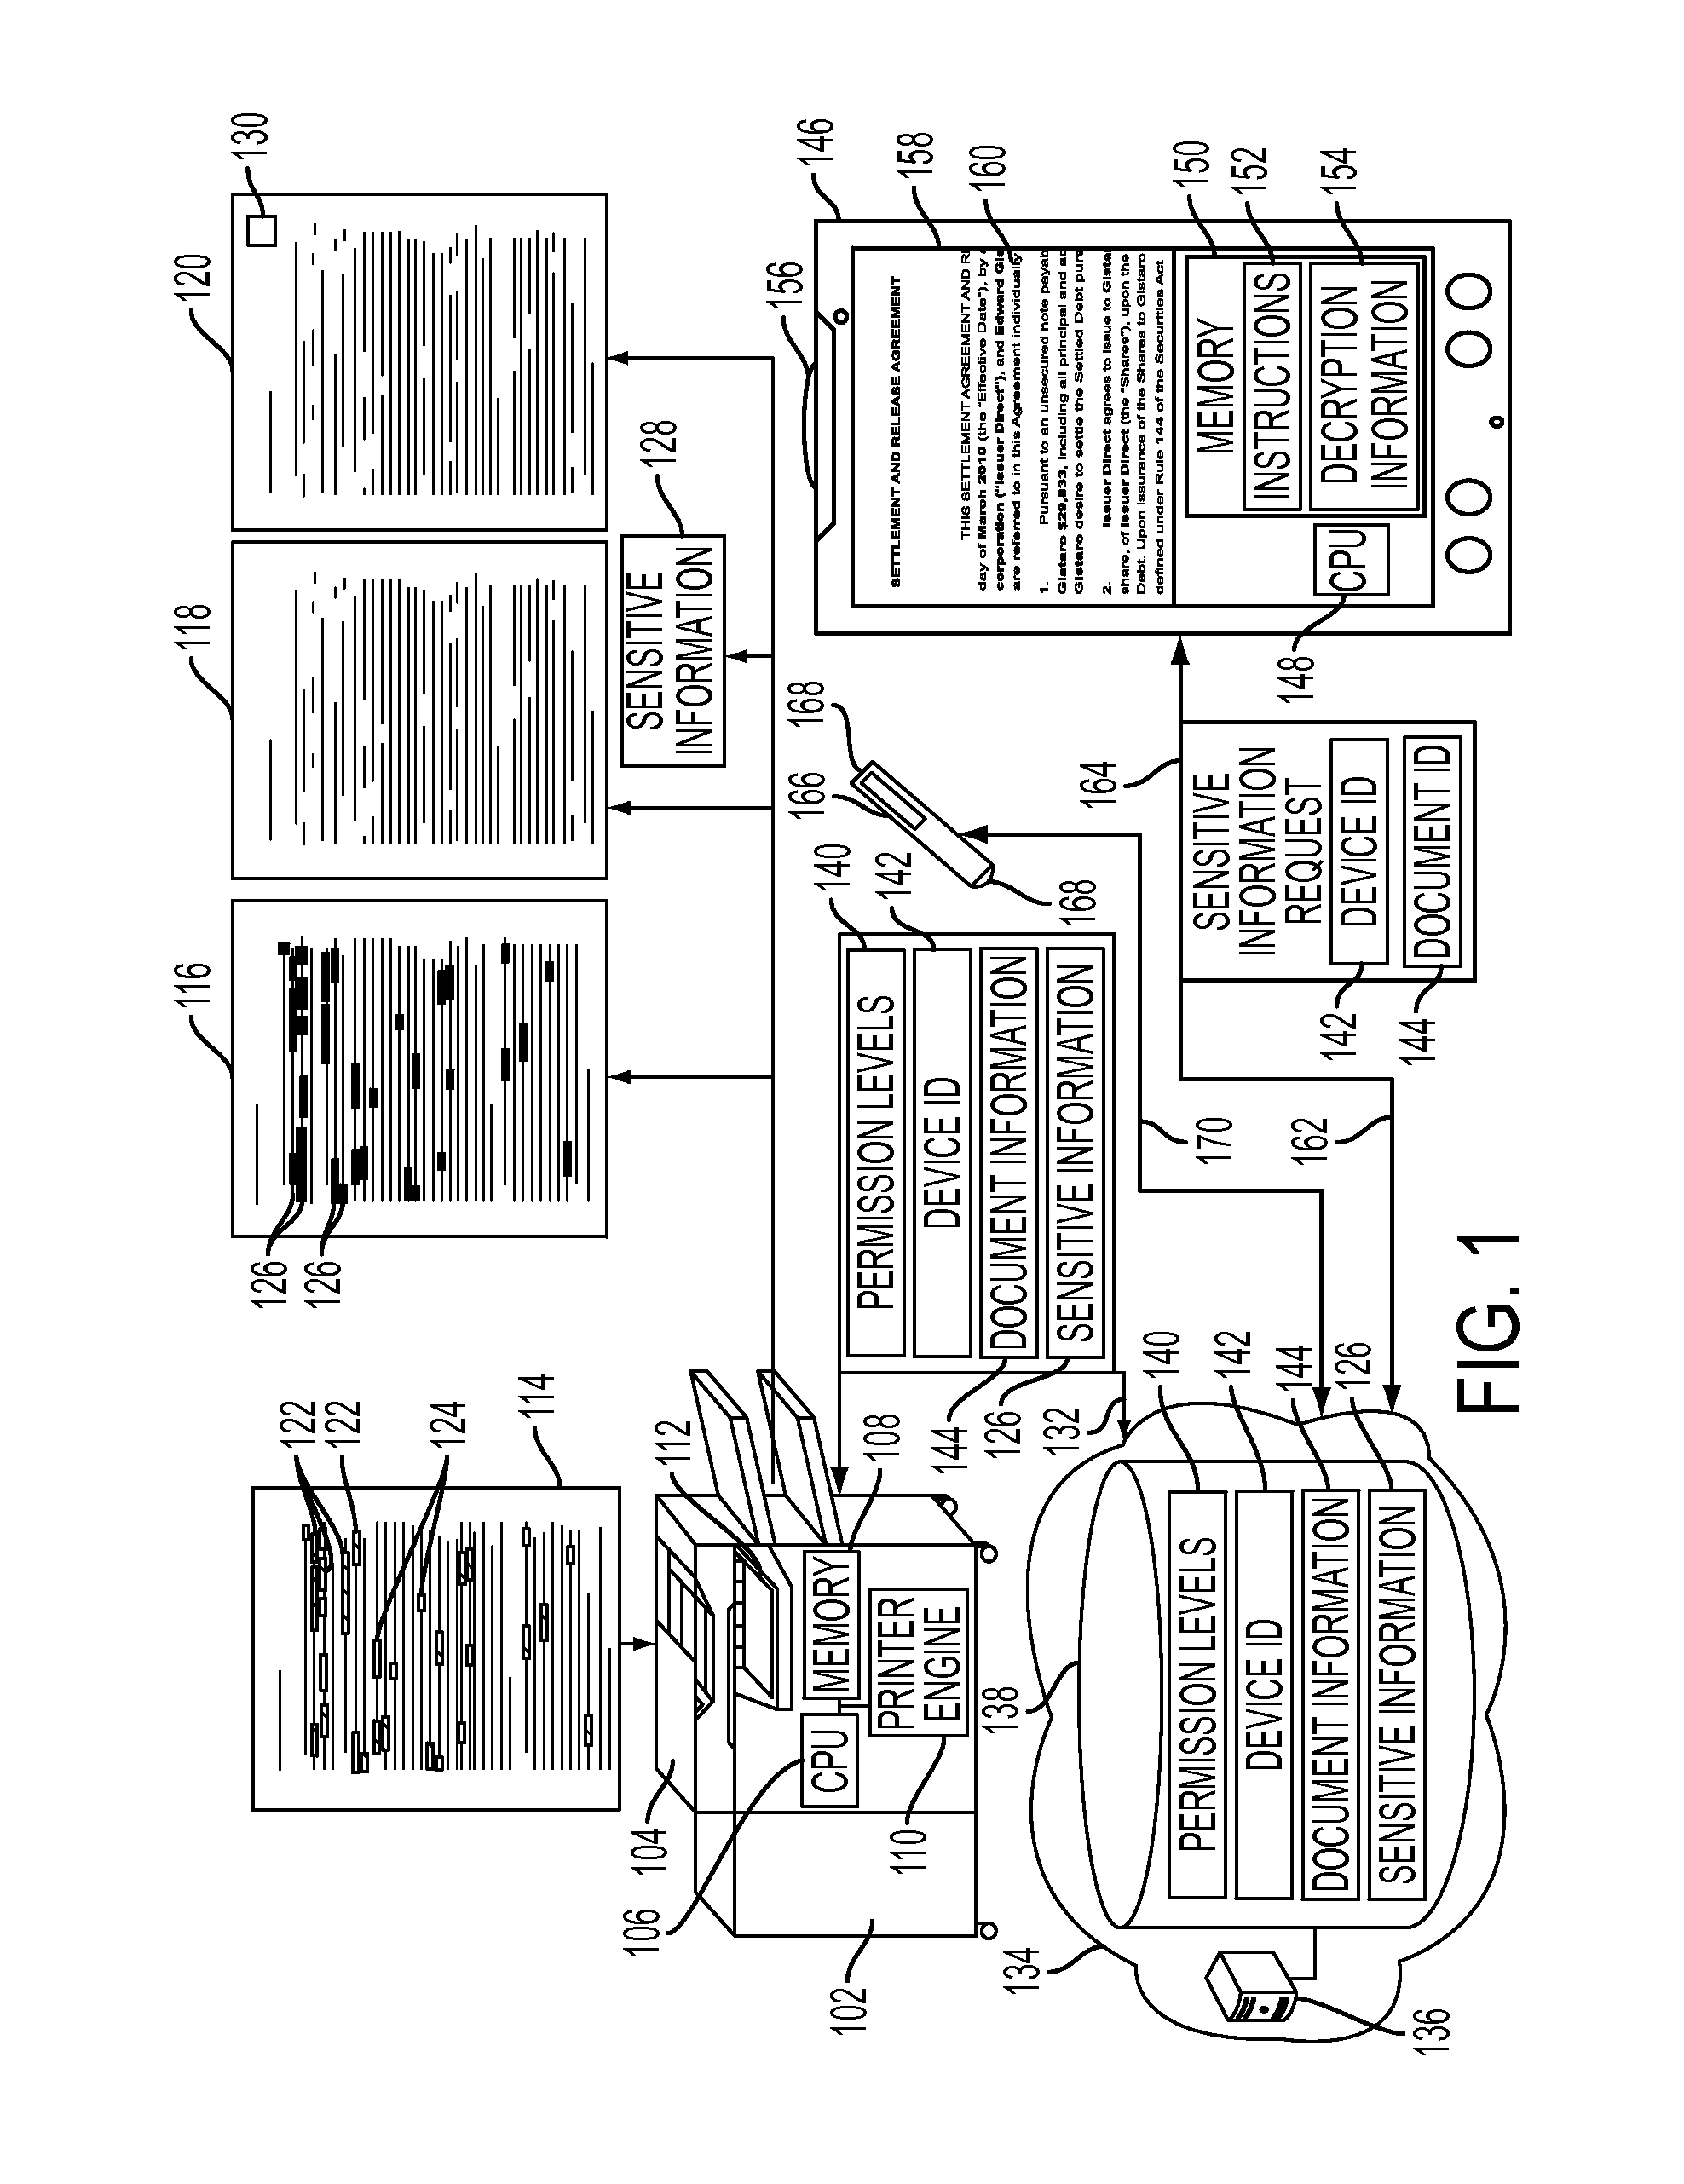 Mobile field level encryption of private documents